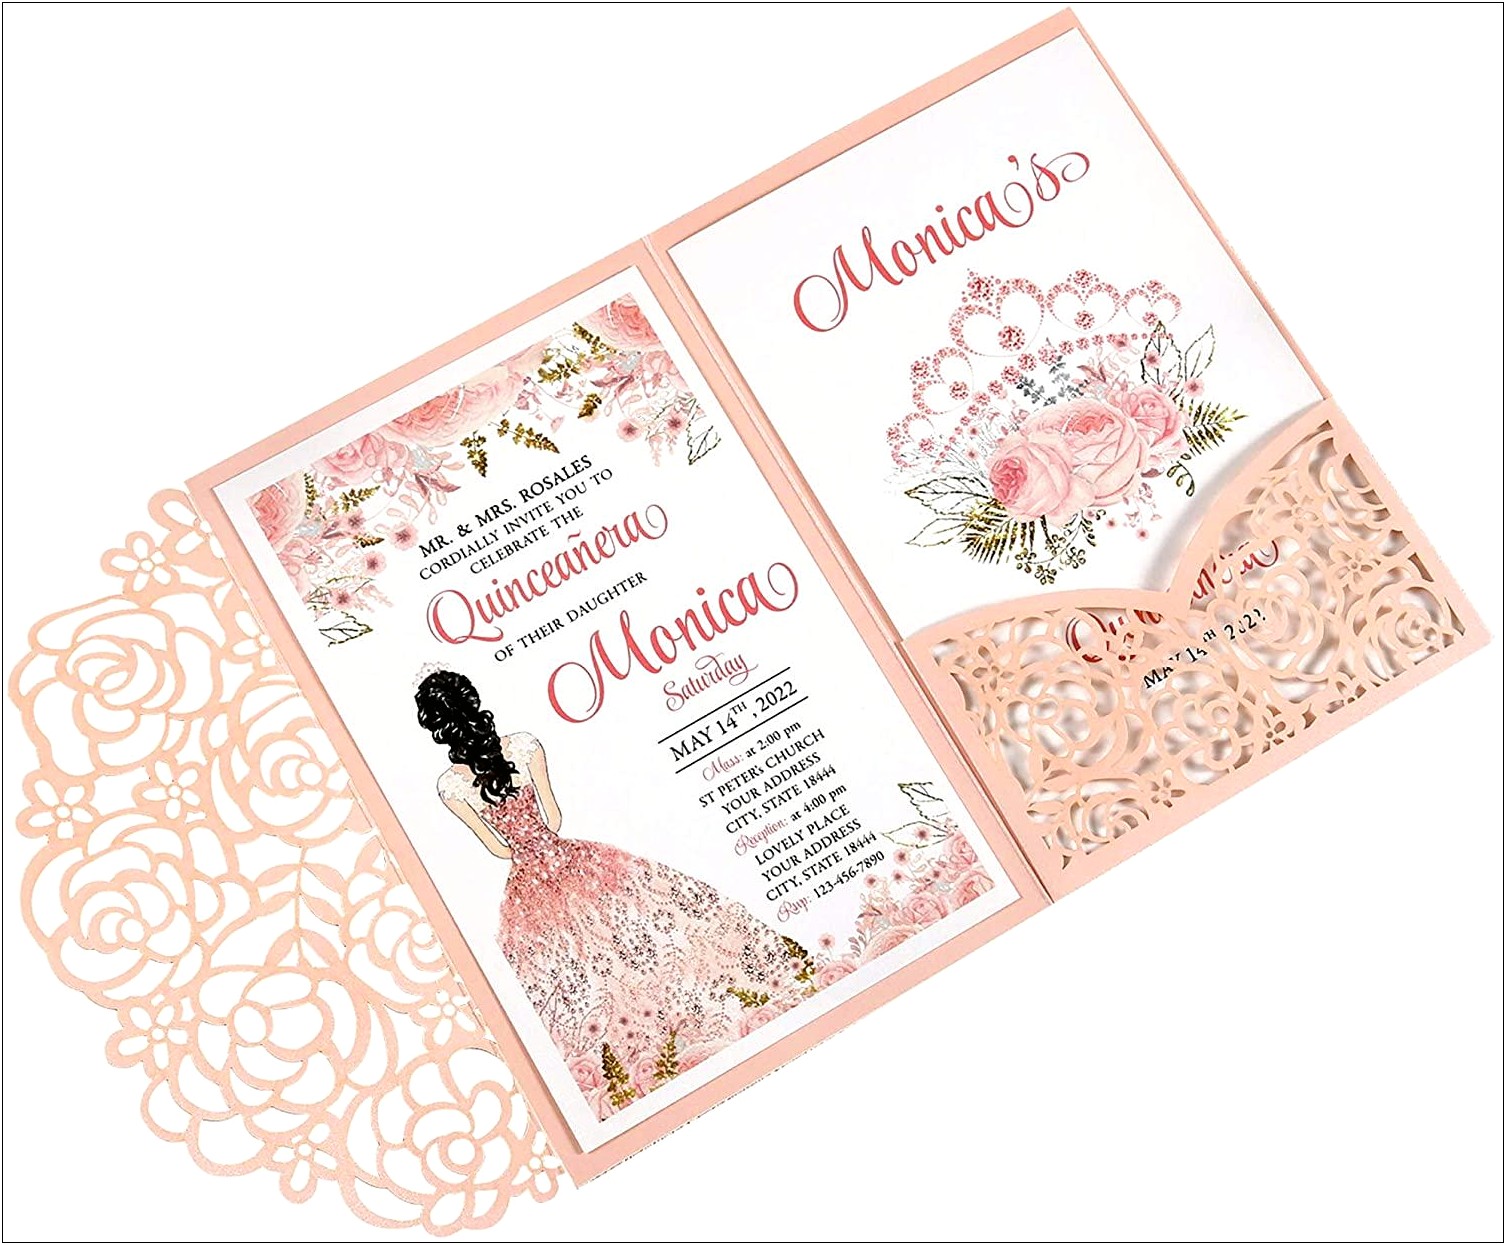 Free Quinceanera Blank Template With A Burgundy Border